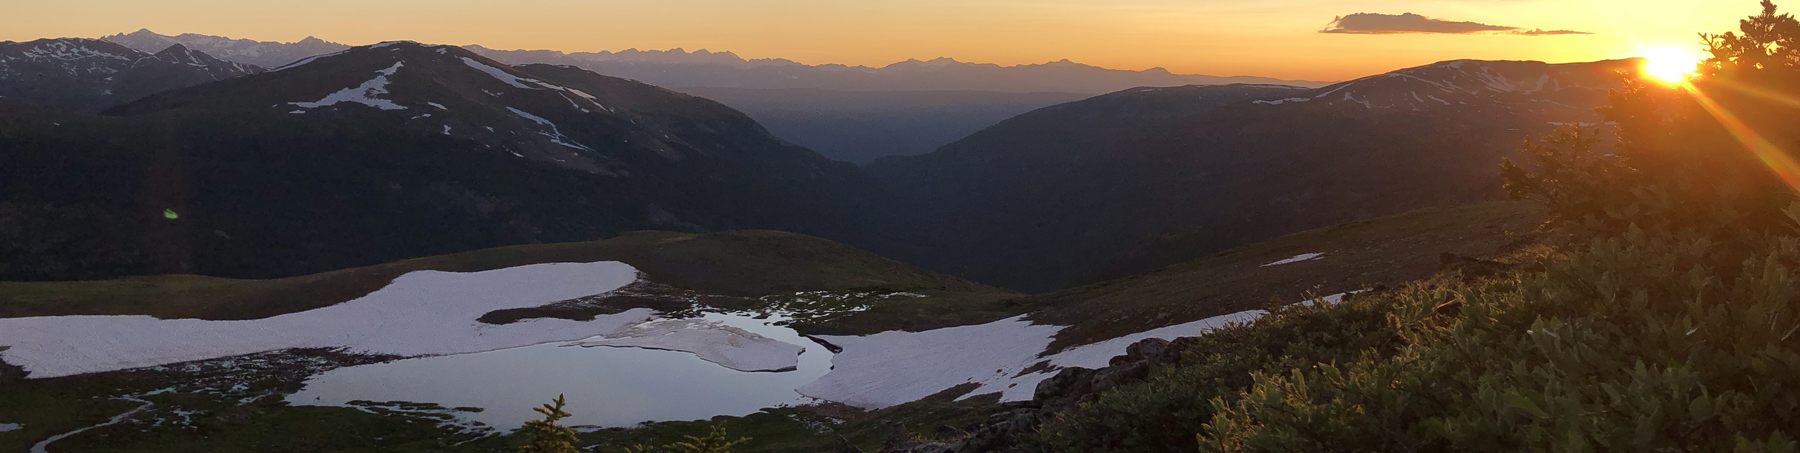 The sun sets on high alpine lakes in the mountains along the Continental Divide